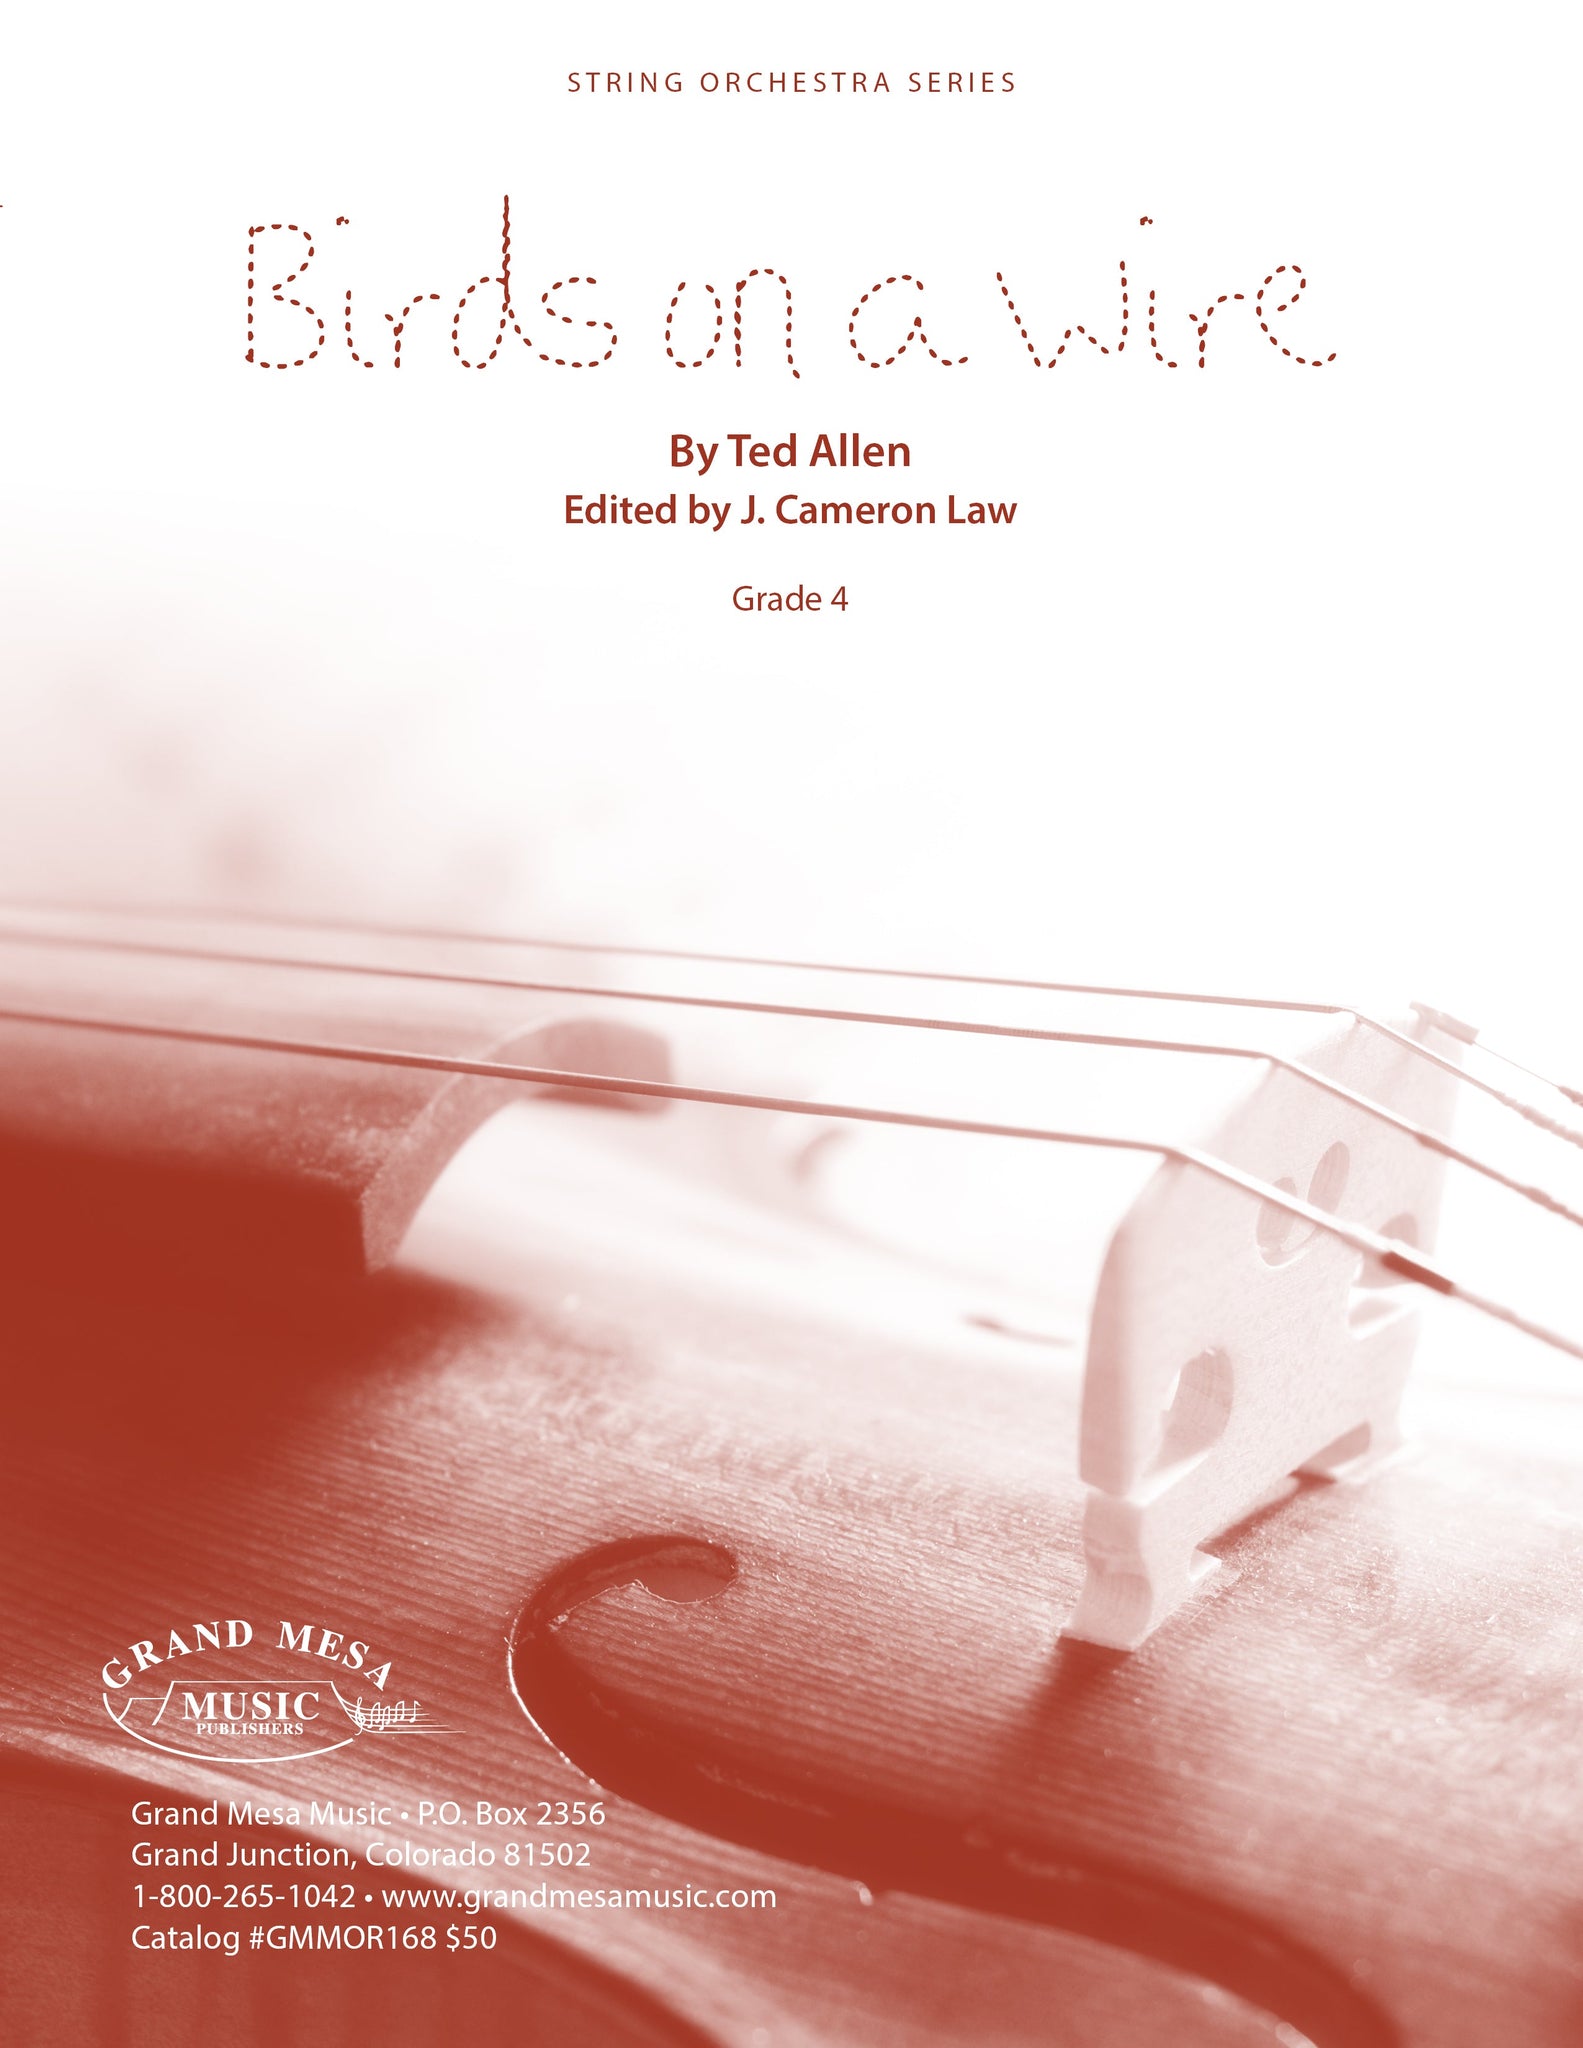 Strings sheet music cover of Birds on a Wire, composed by Ted Allen.